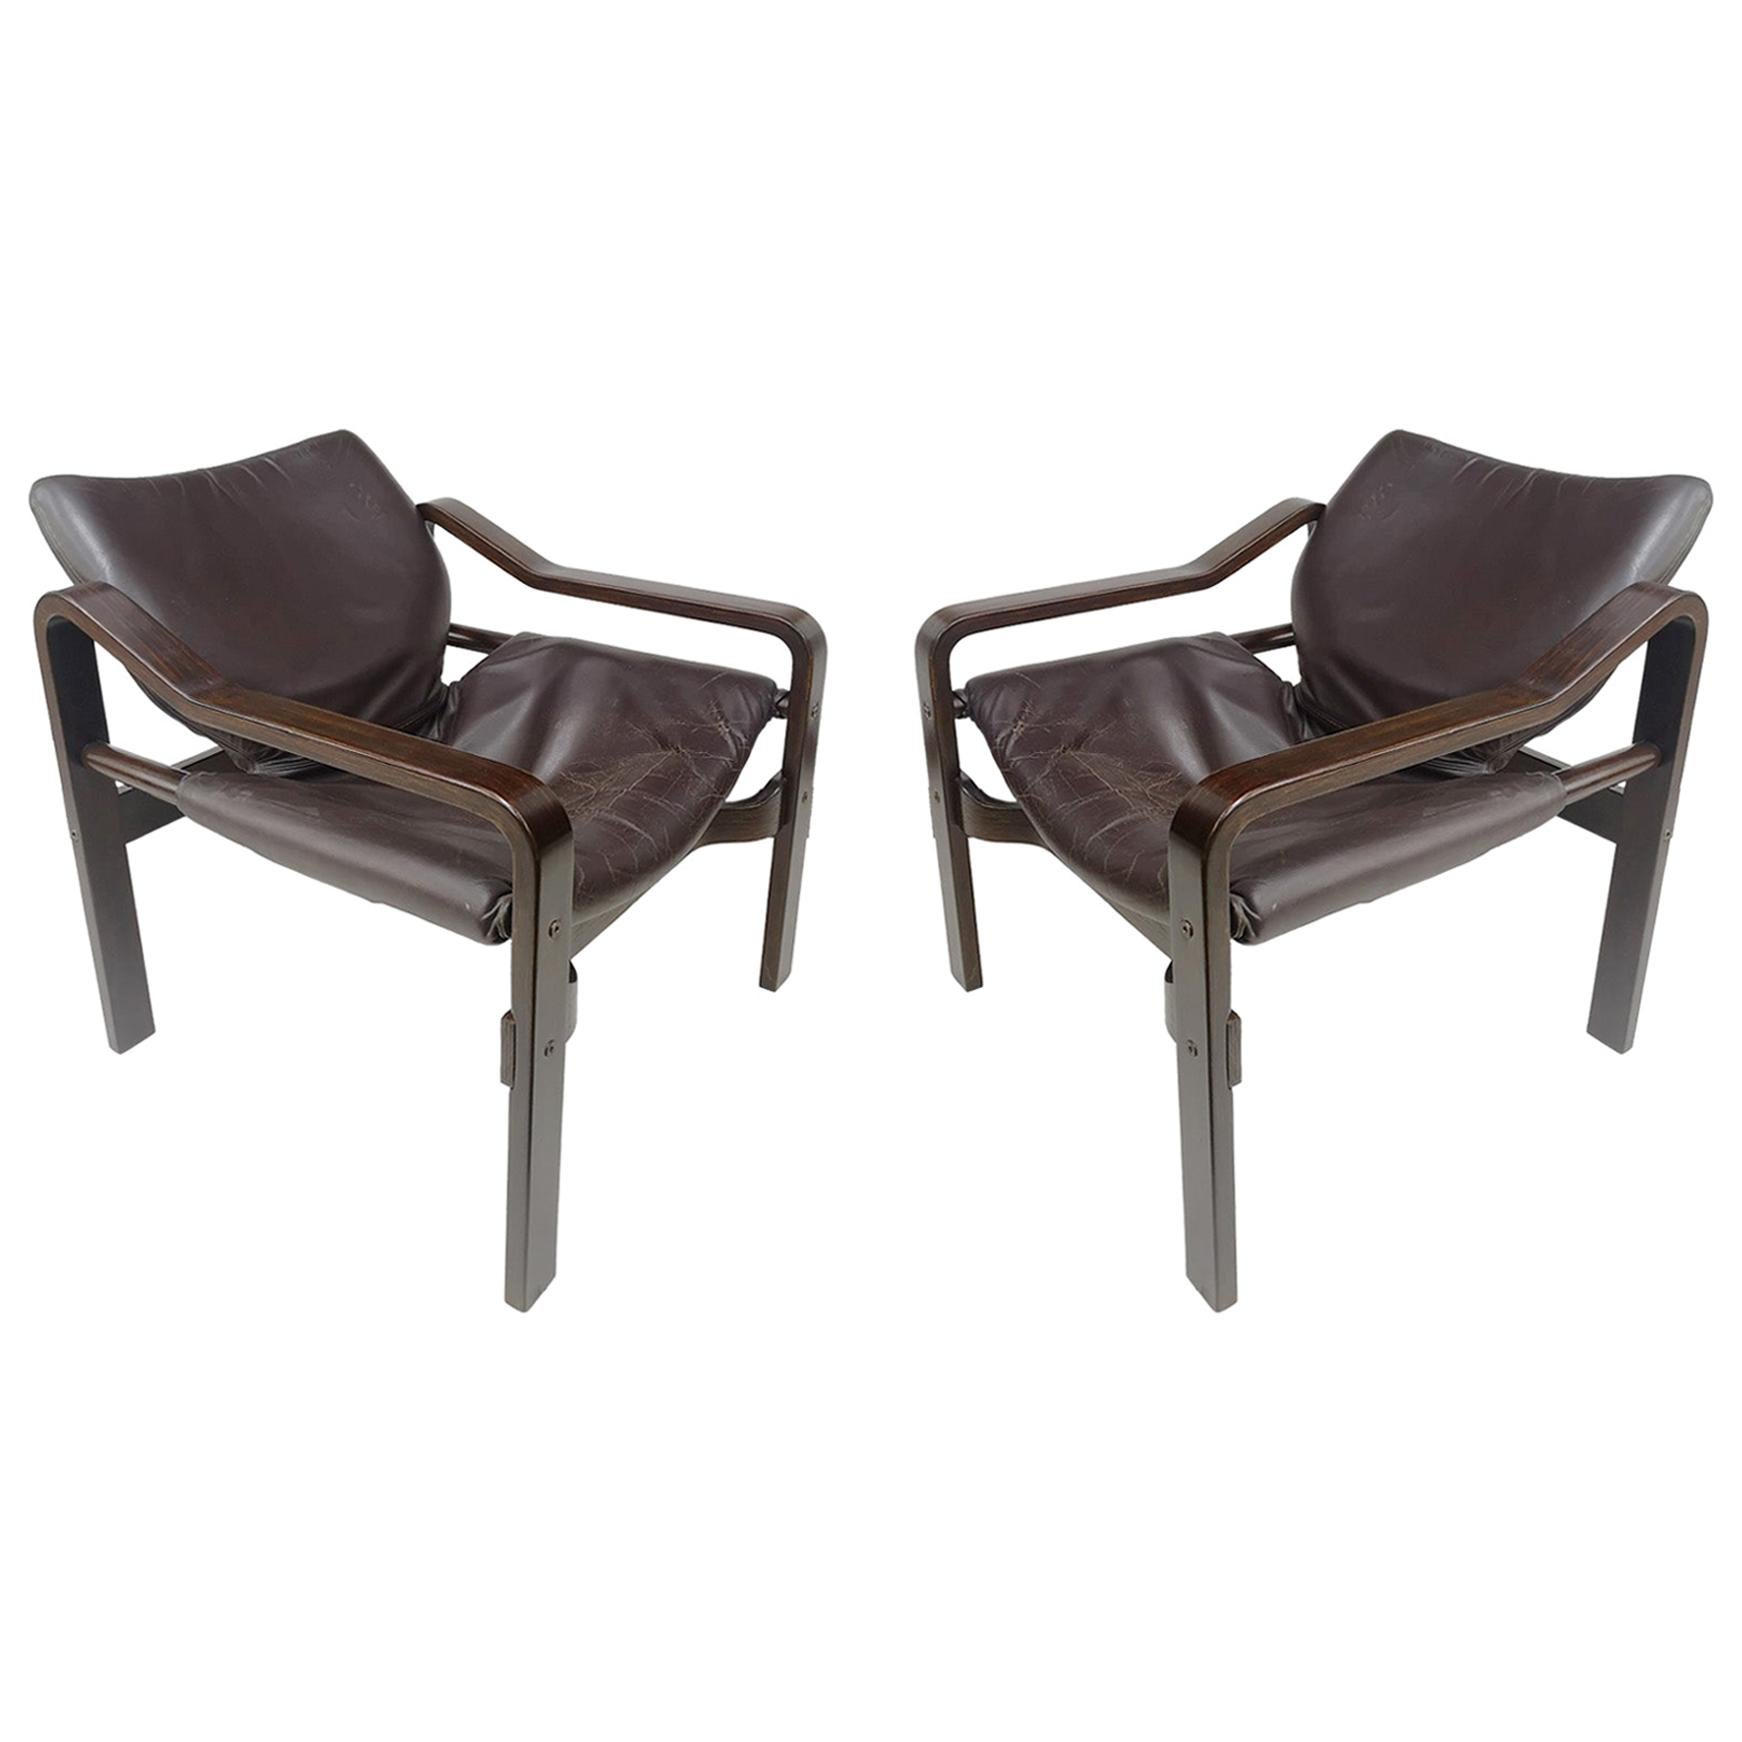 Set of Plywood Chairs with Dark Brown Leather Upholstery, 1970s